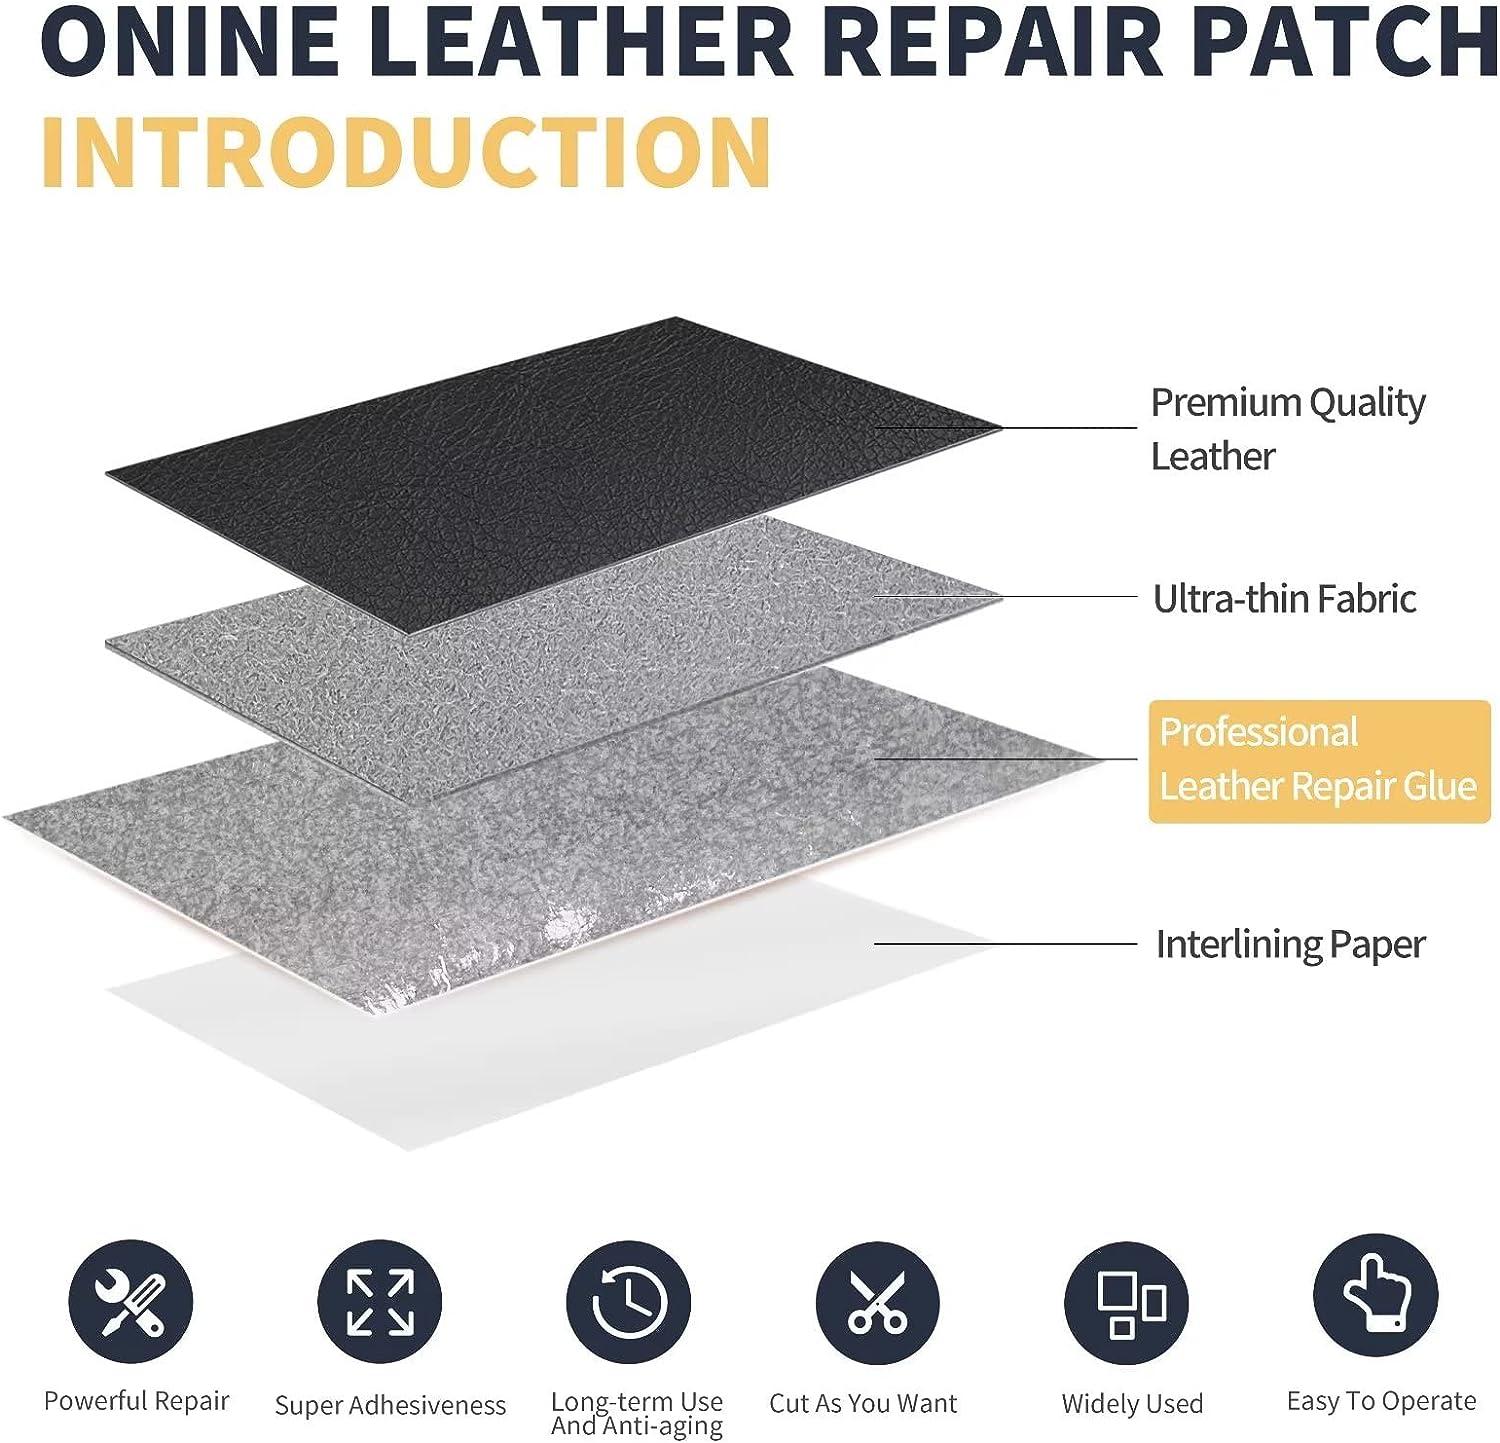  Leather Repair Patch Artificial Leather Repair Patches, Self  Adhesive Strong Adhesive Repair Subsidy, for Repairing Sofas/Seats (Color :  A9, Size : 100x138cm/39x54)